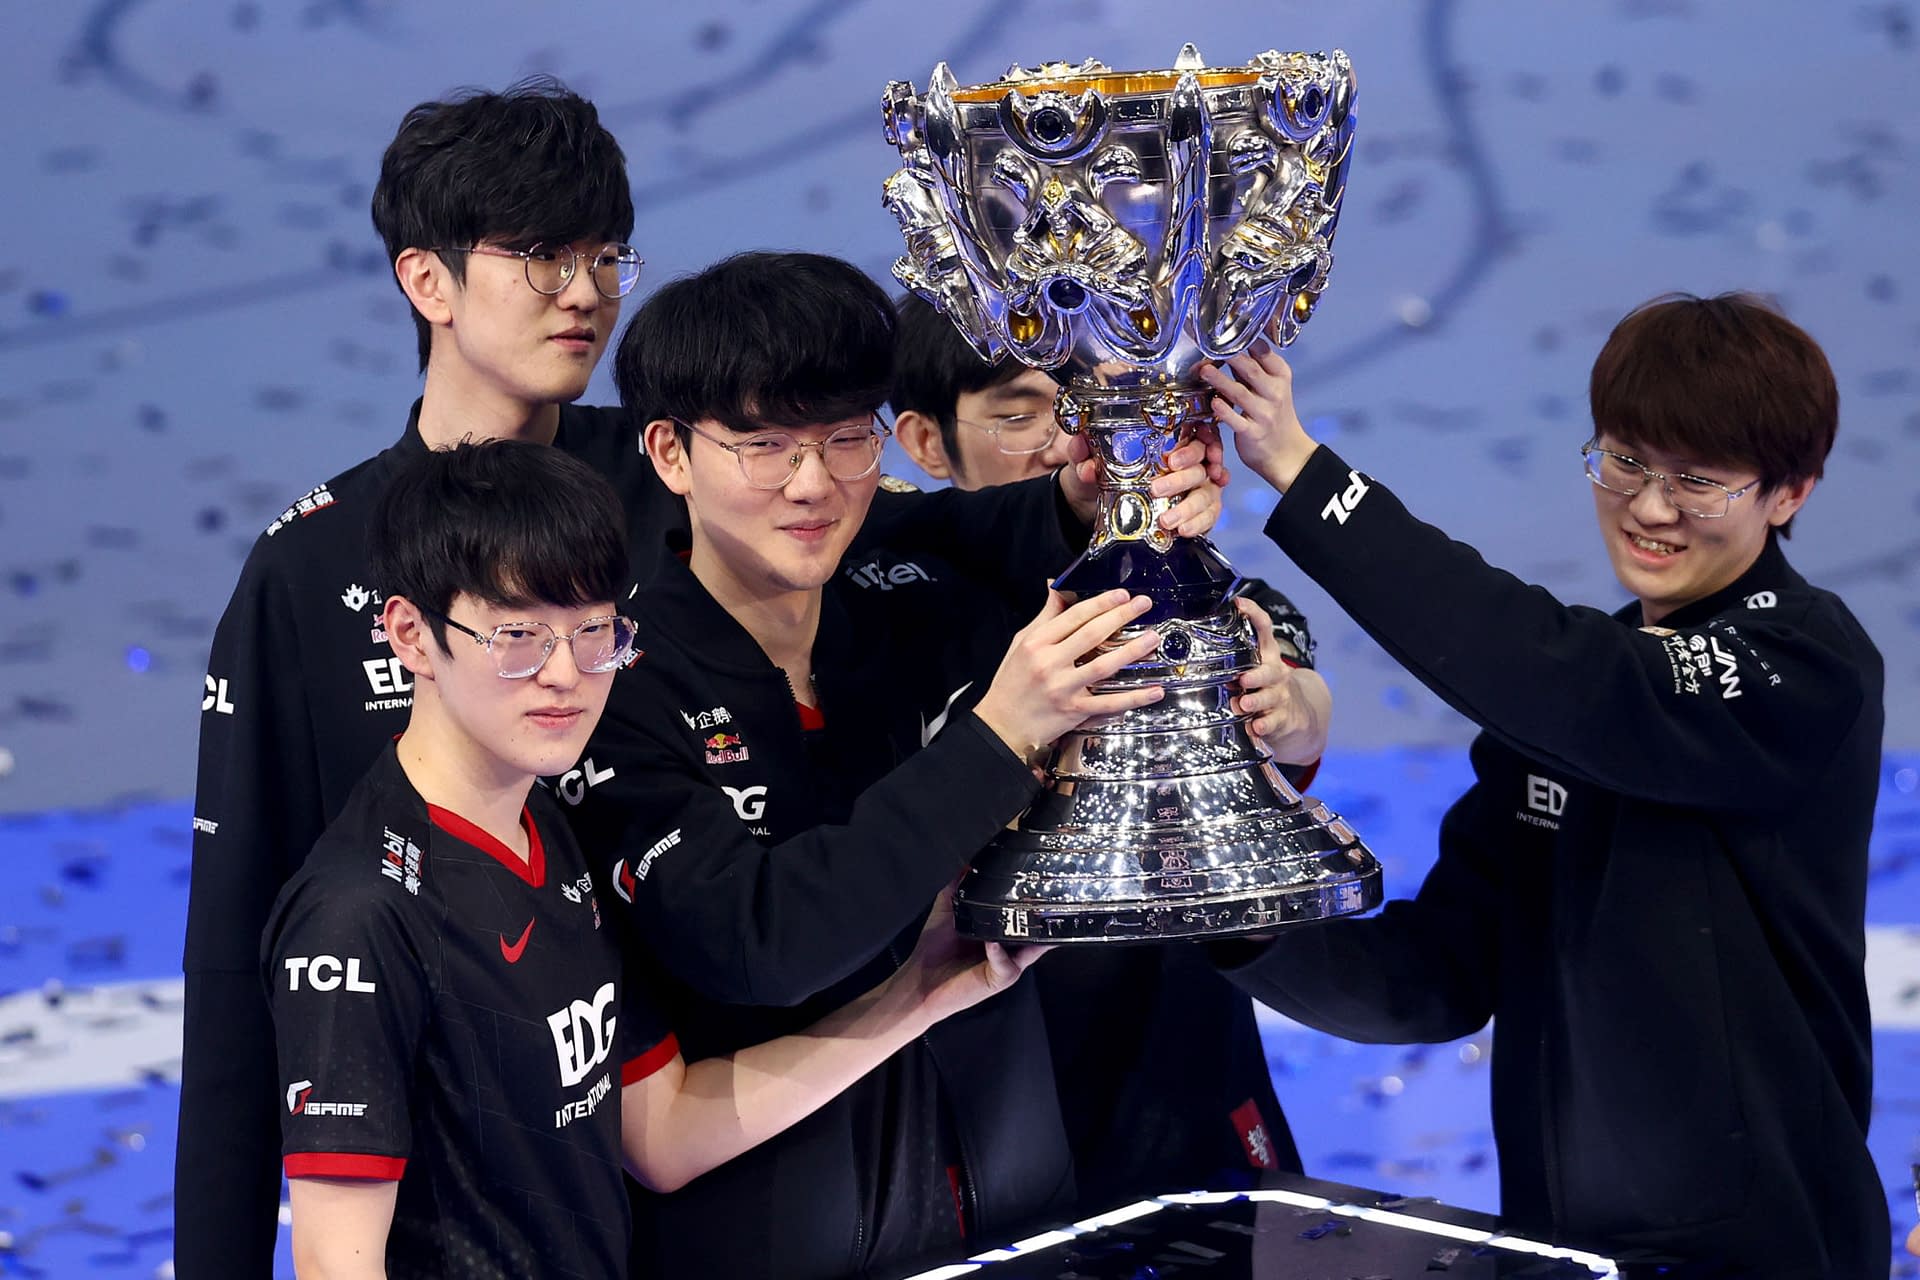 EDward Gaming Takes League Of Legends 2021 World Championship